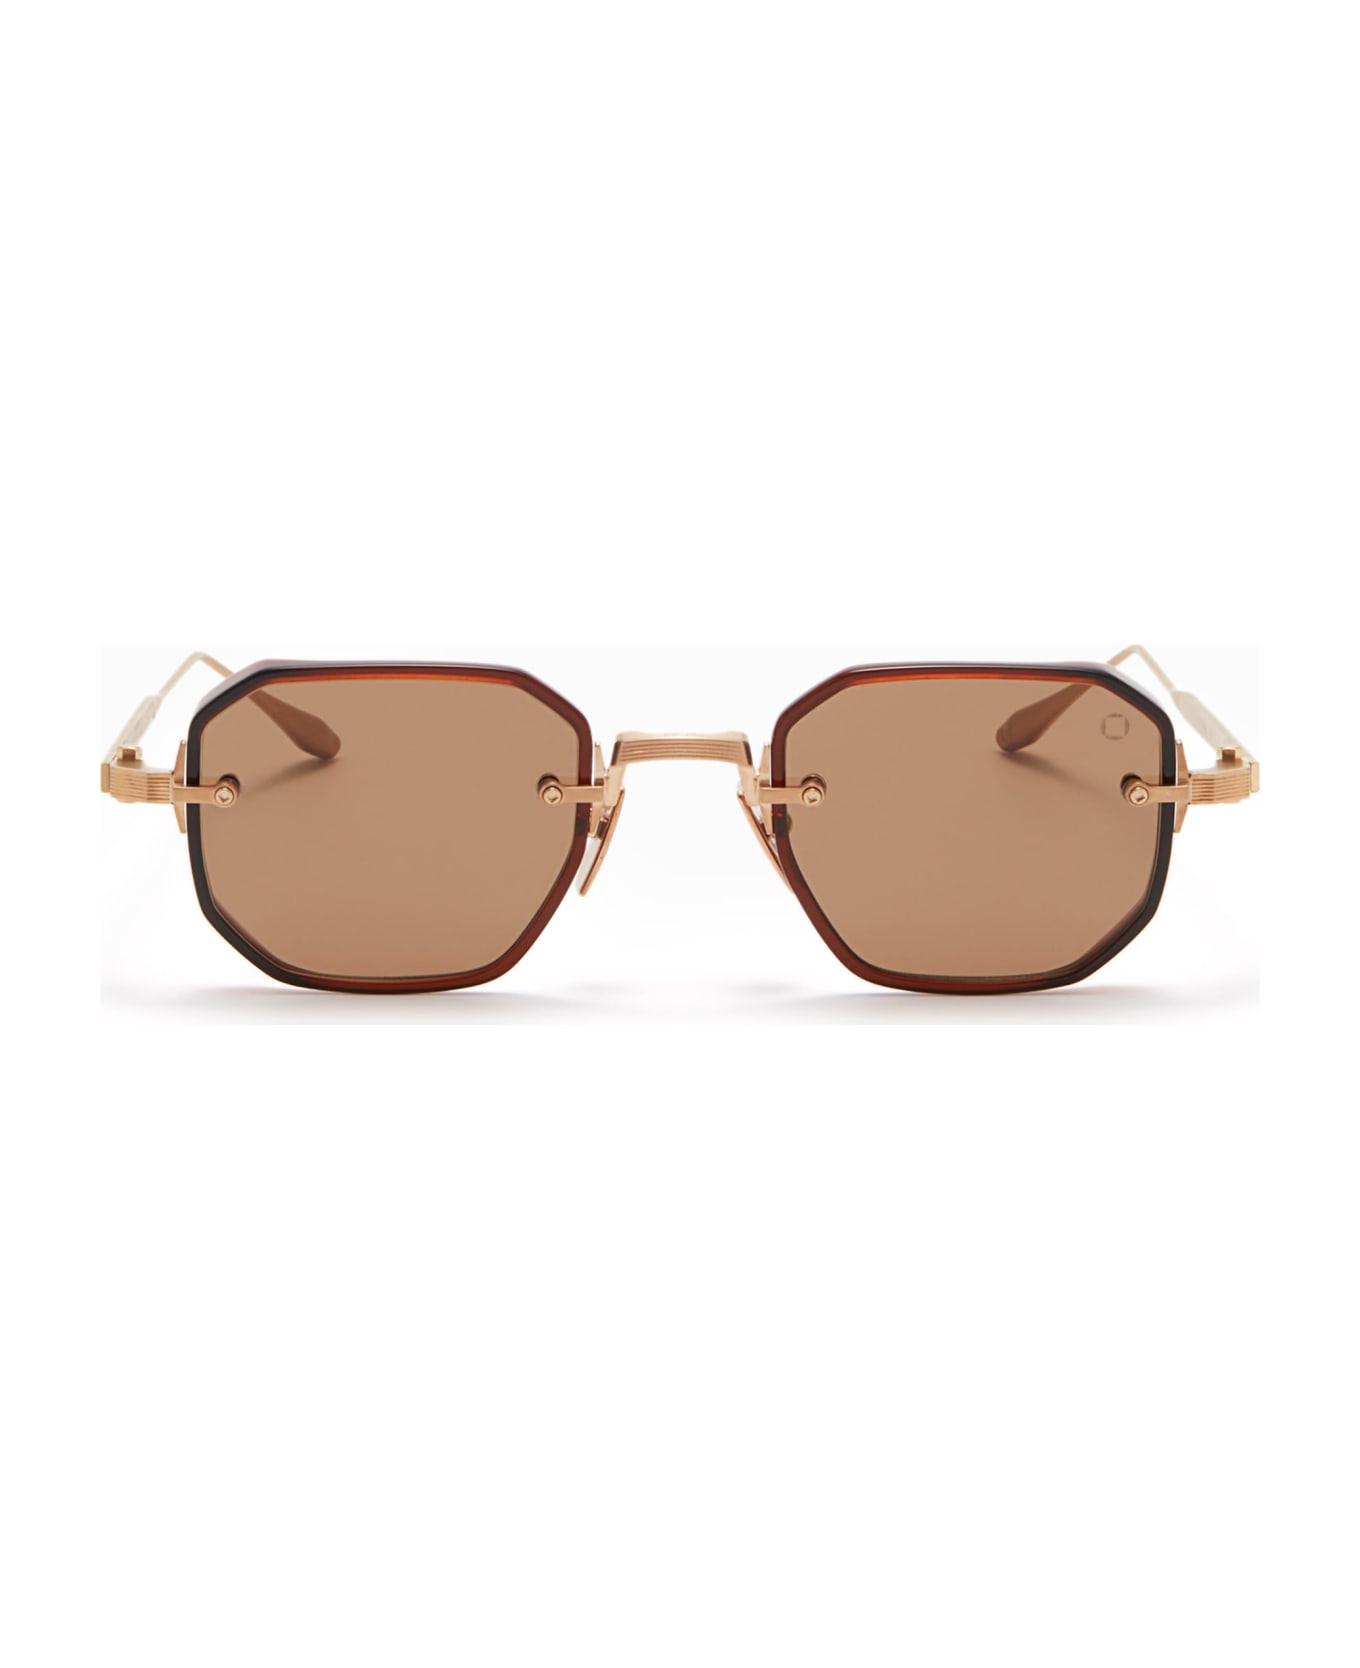 Akoni Juno-two - Brushed Gold / Brown Crystal Sunglasses - Gold サングラス